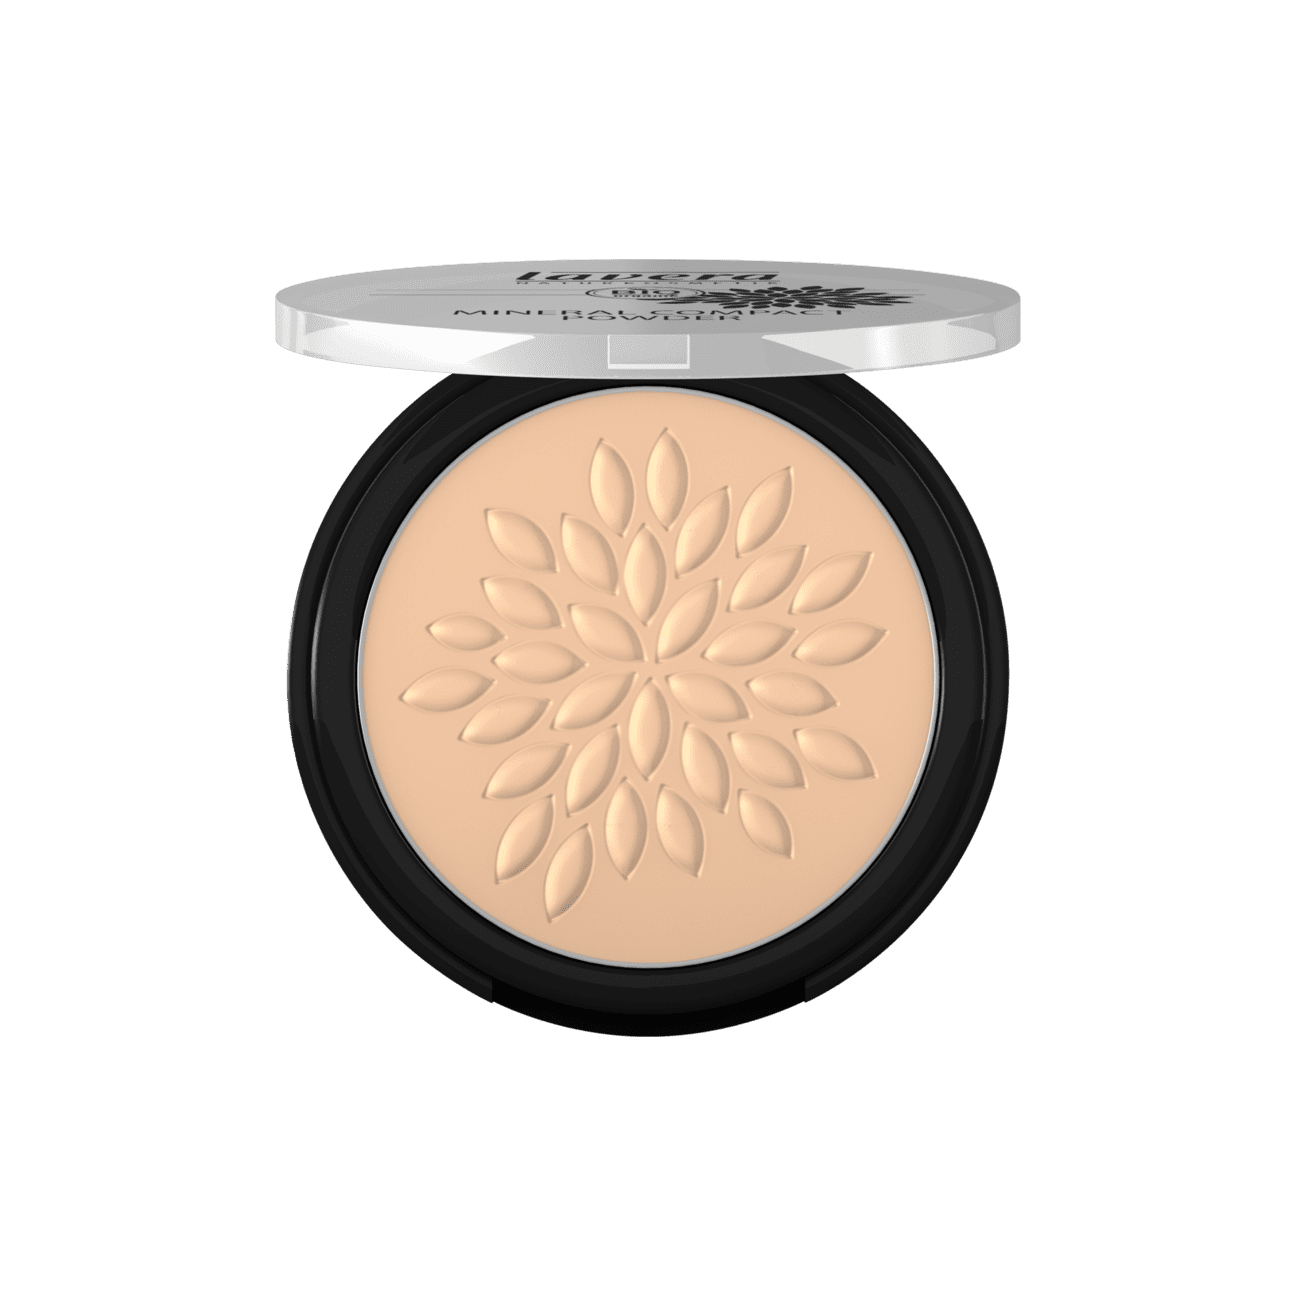 Face Powder PNG Background Isolated Image